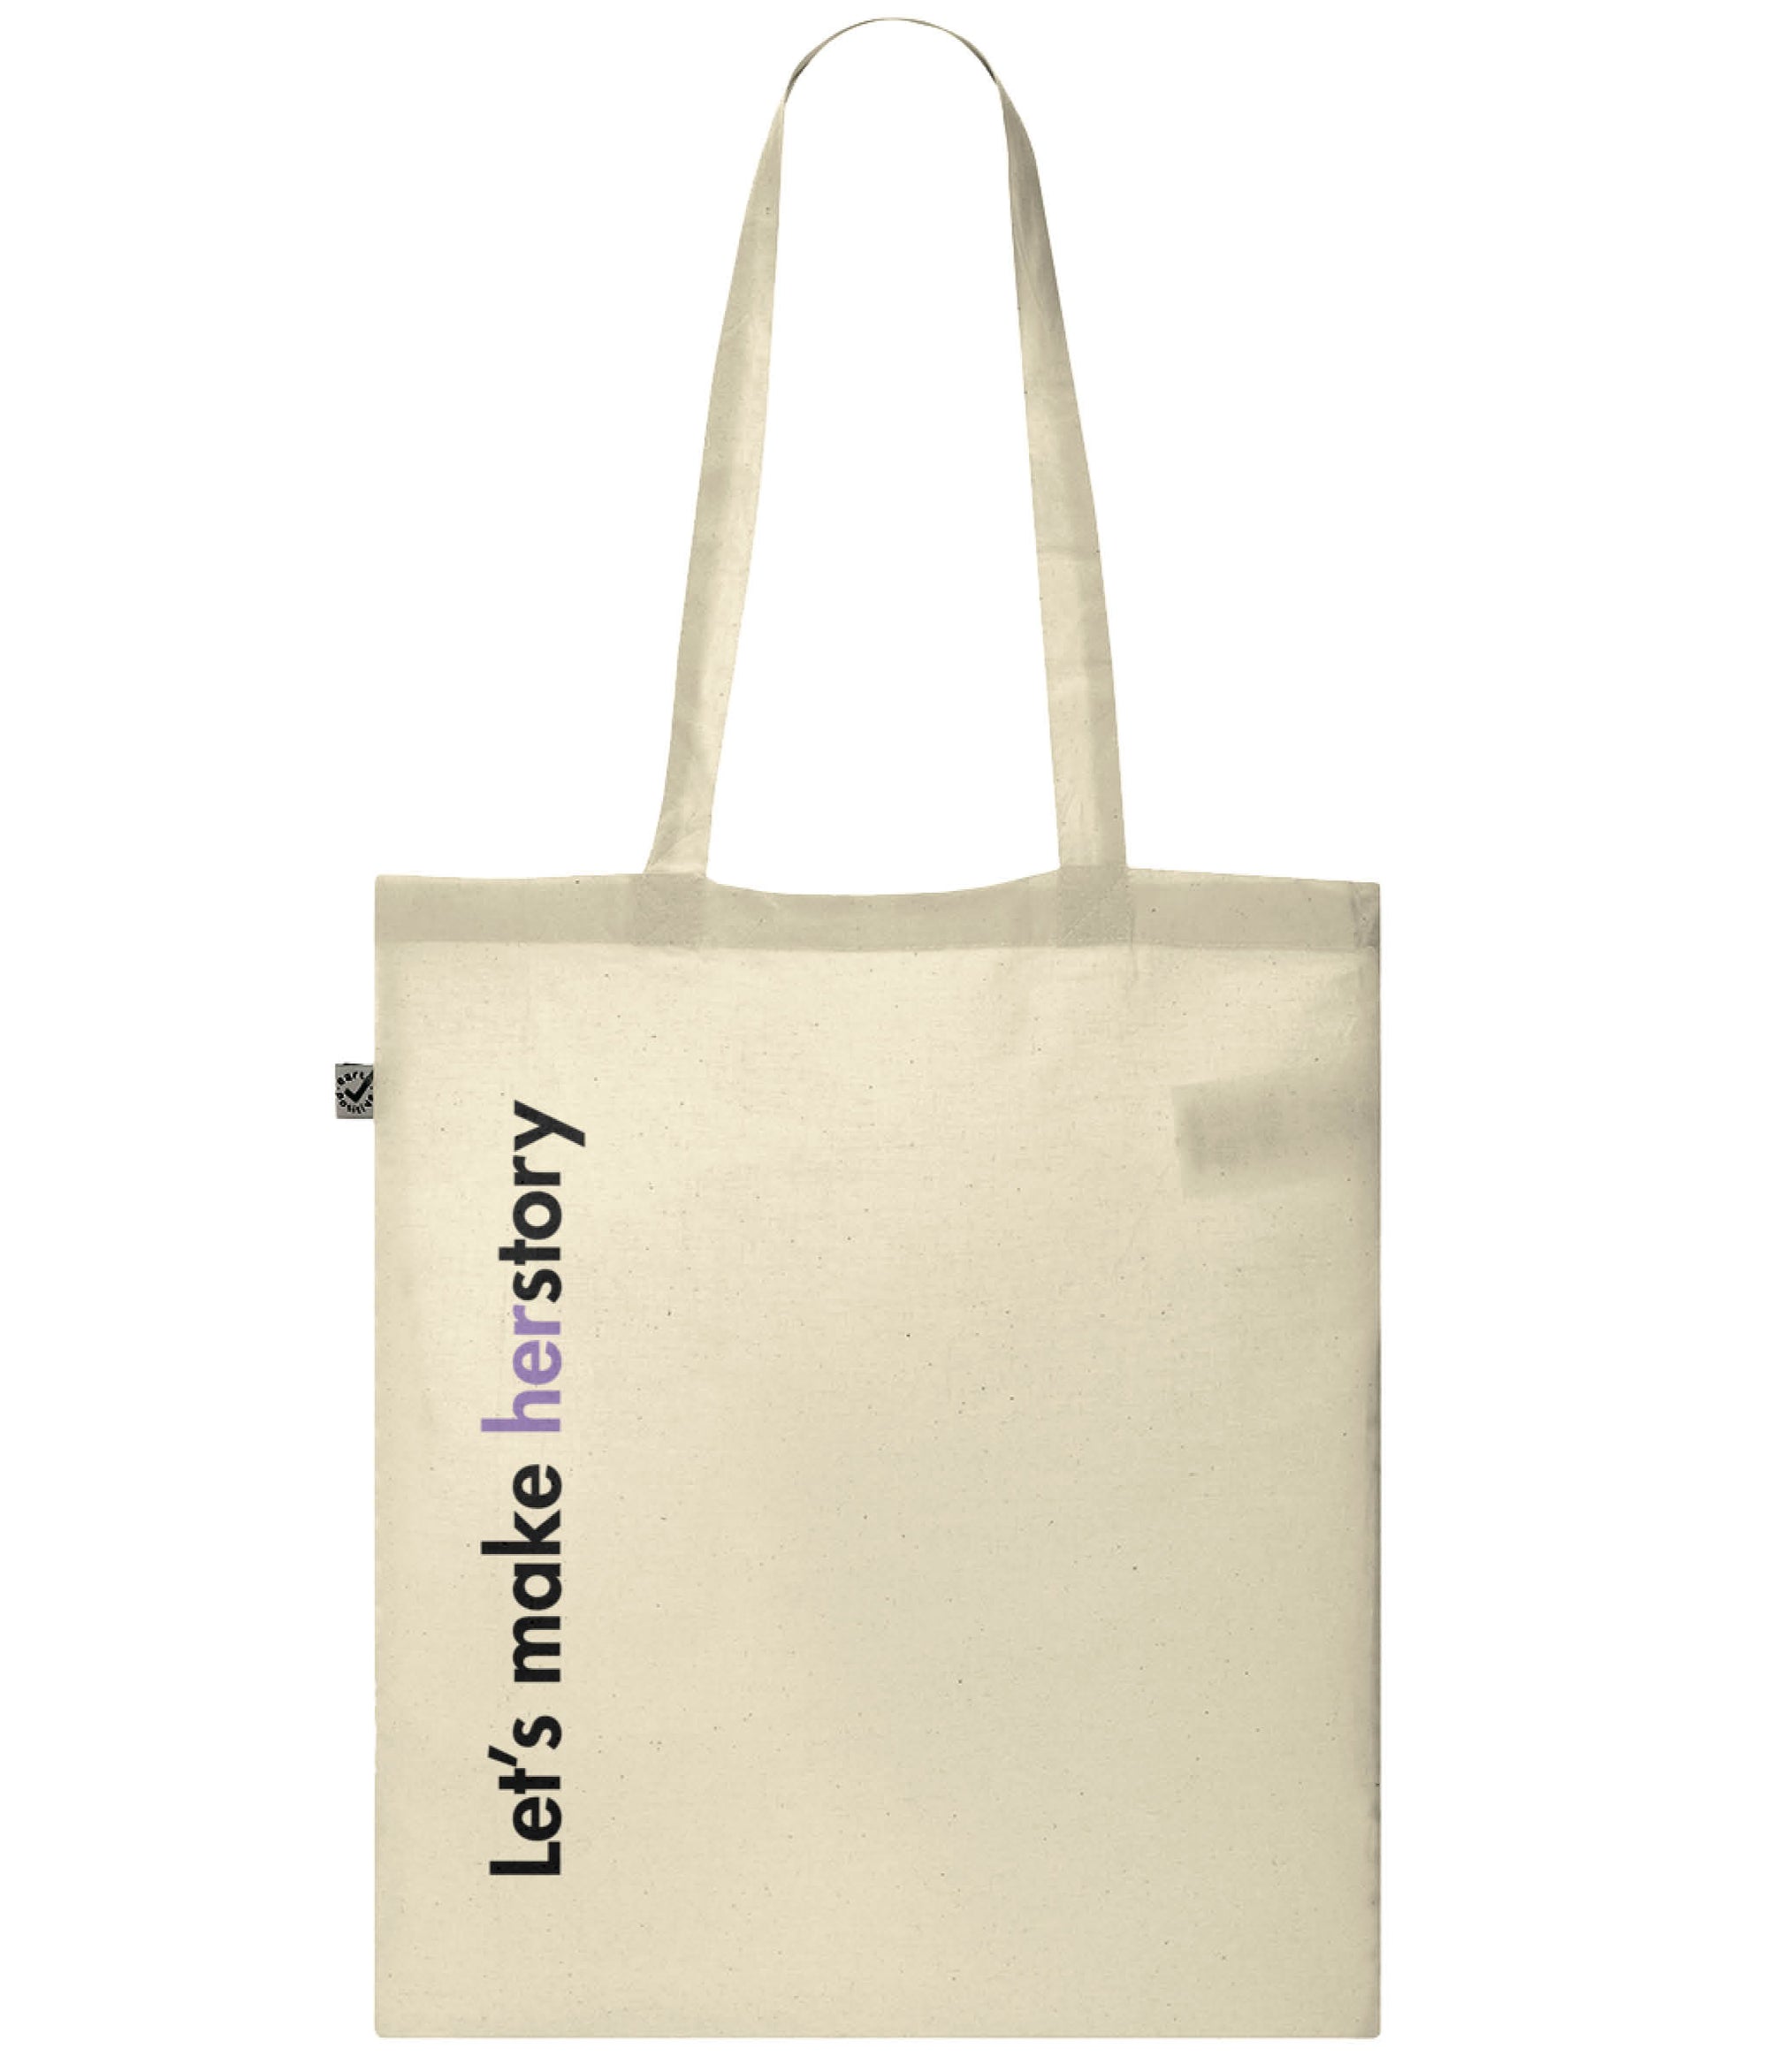 Let's Make Herstory Organic Combed Cotton Tote Bag Natural